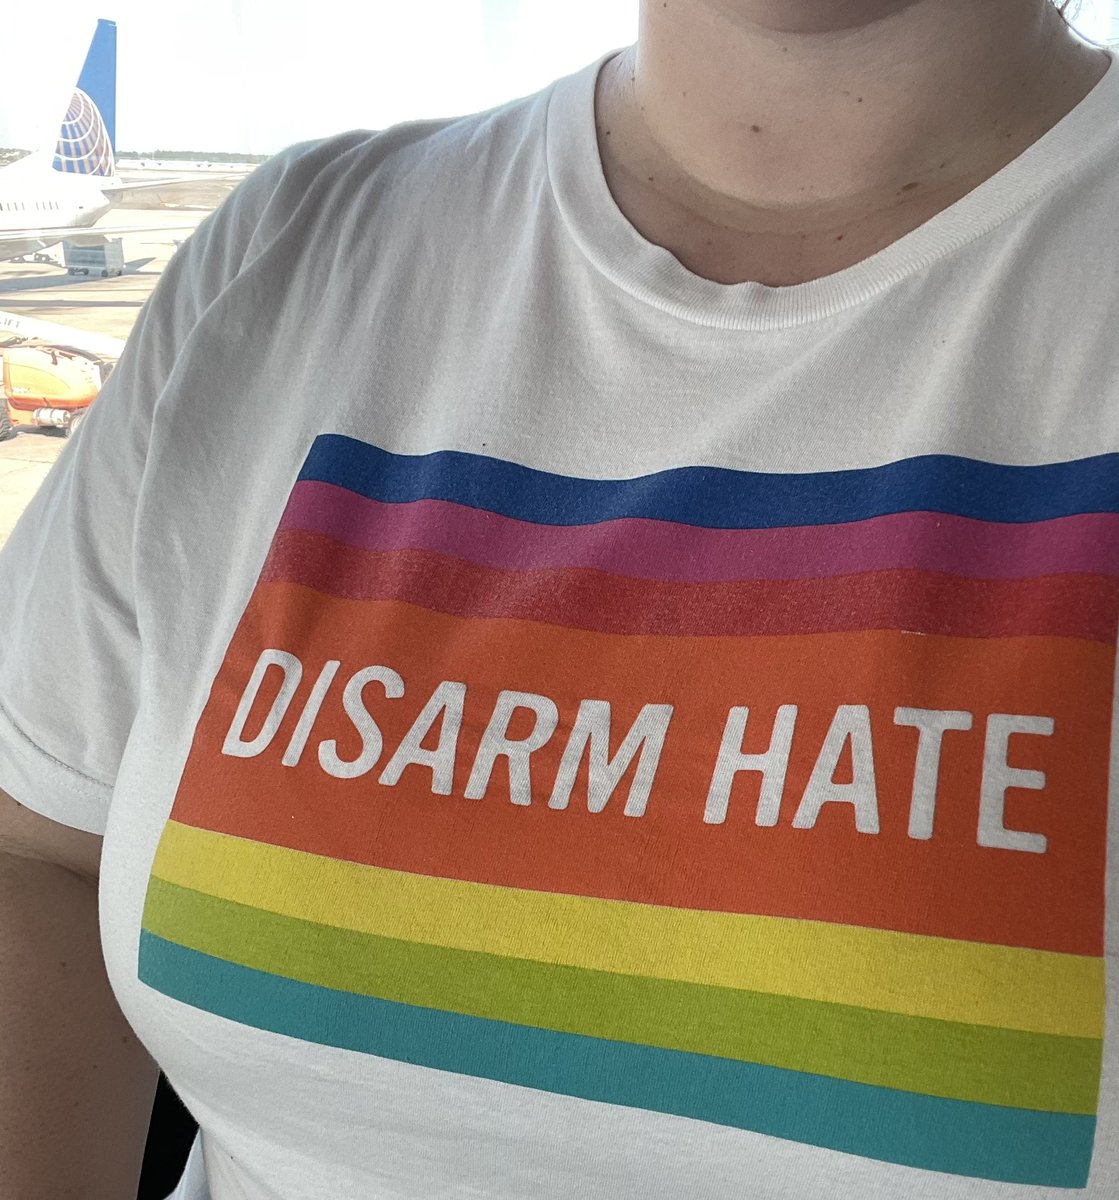 Obvious wardrobe choice when you’re flying out of FL. So many amazing FL @MomsDemand volunteers are demanding gun safety in a state where entire communities of people are being targeted by the GOP for simply existing. #KeepGoing #DisarmHate #SayGay #Flapol